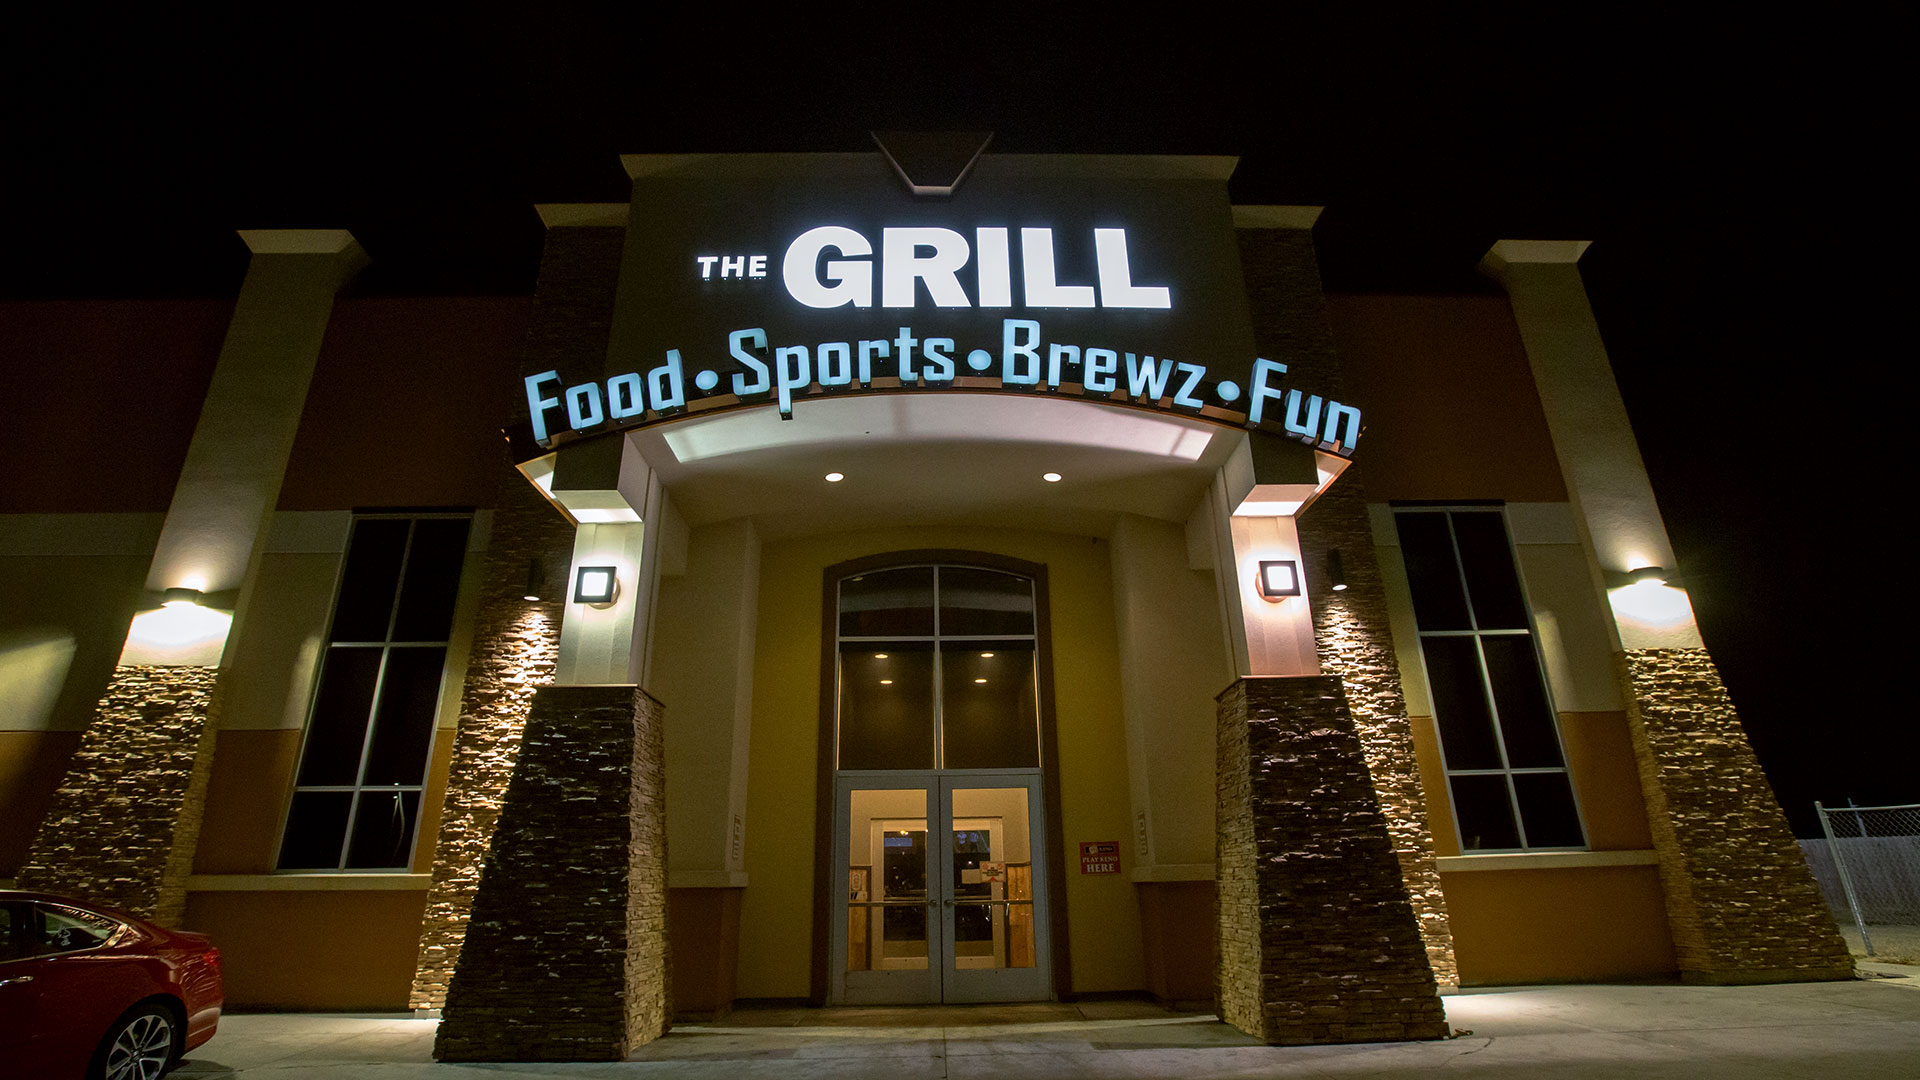 The Grill exterior signage